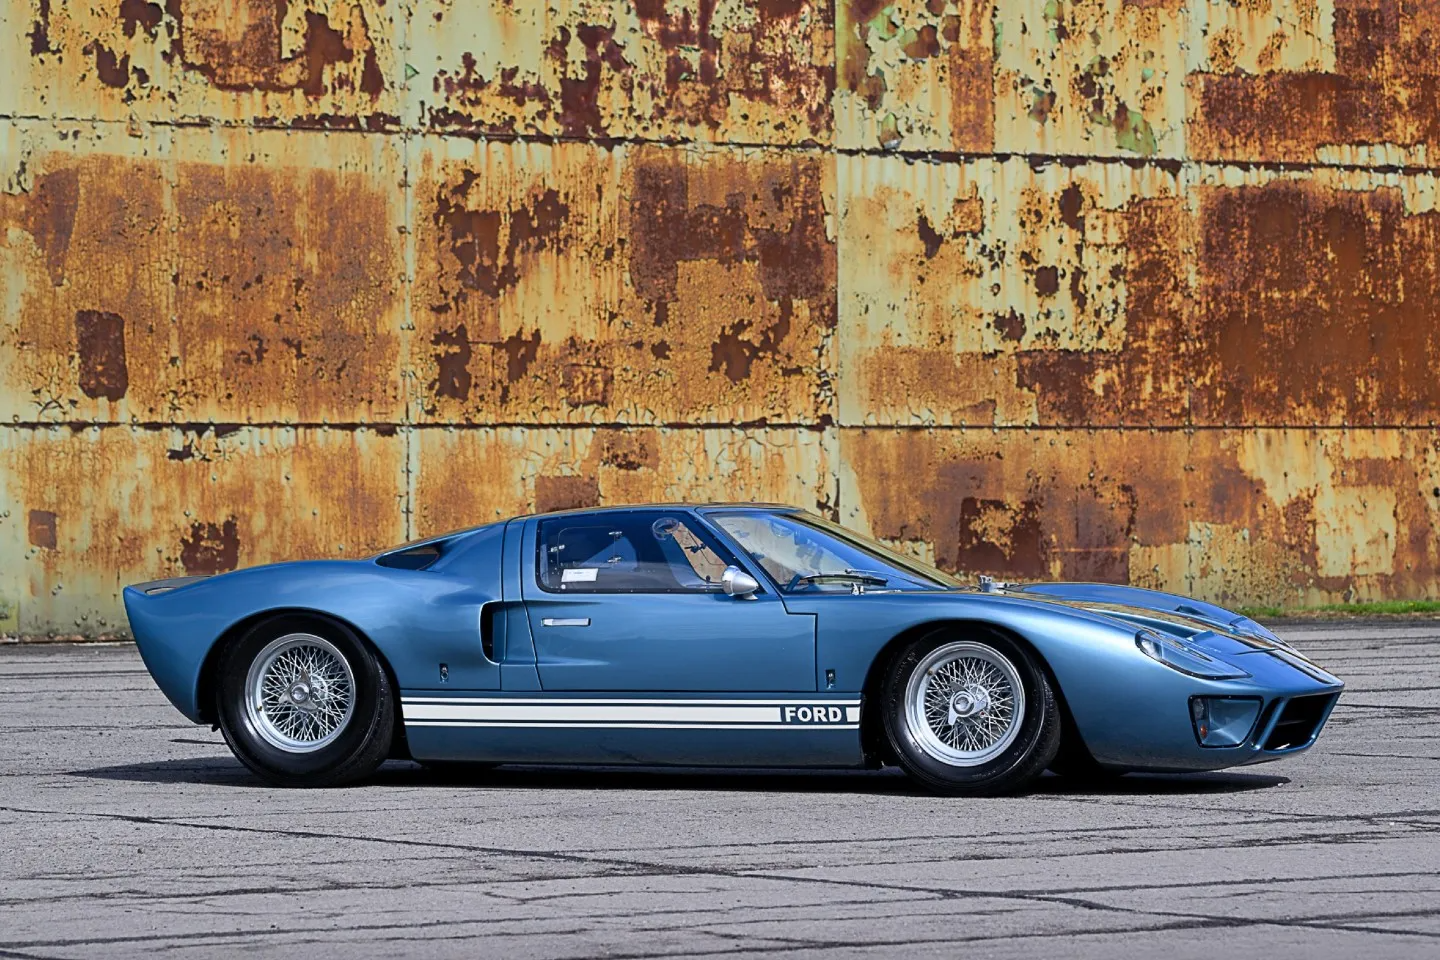 This rare road-ready 1967 Ford GT40 could be yours